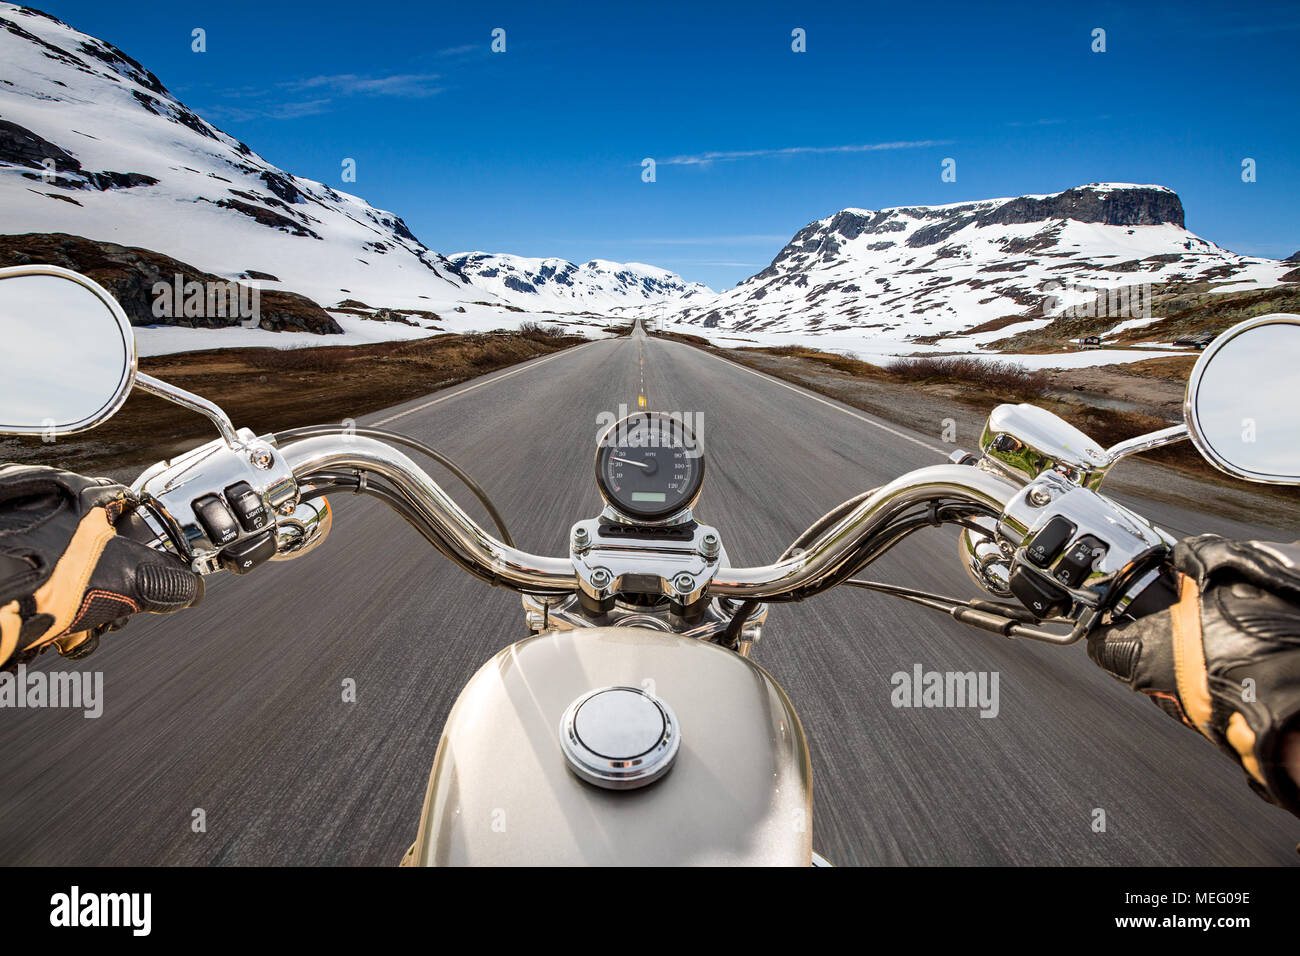 Biker driving a motorcycle rides along the asphalt road. First-person view. Stock Photo